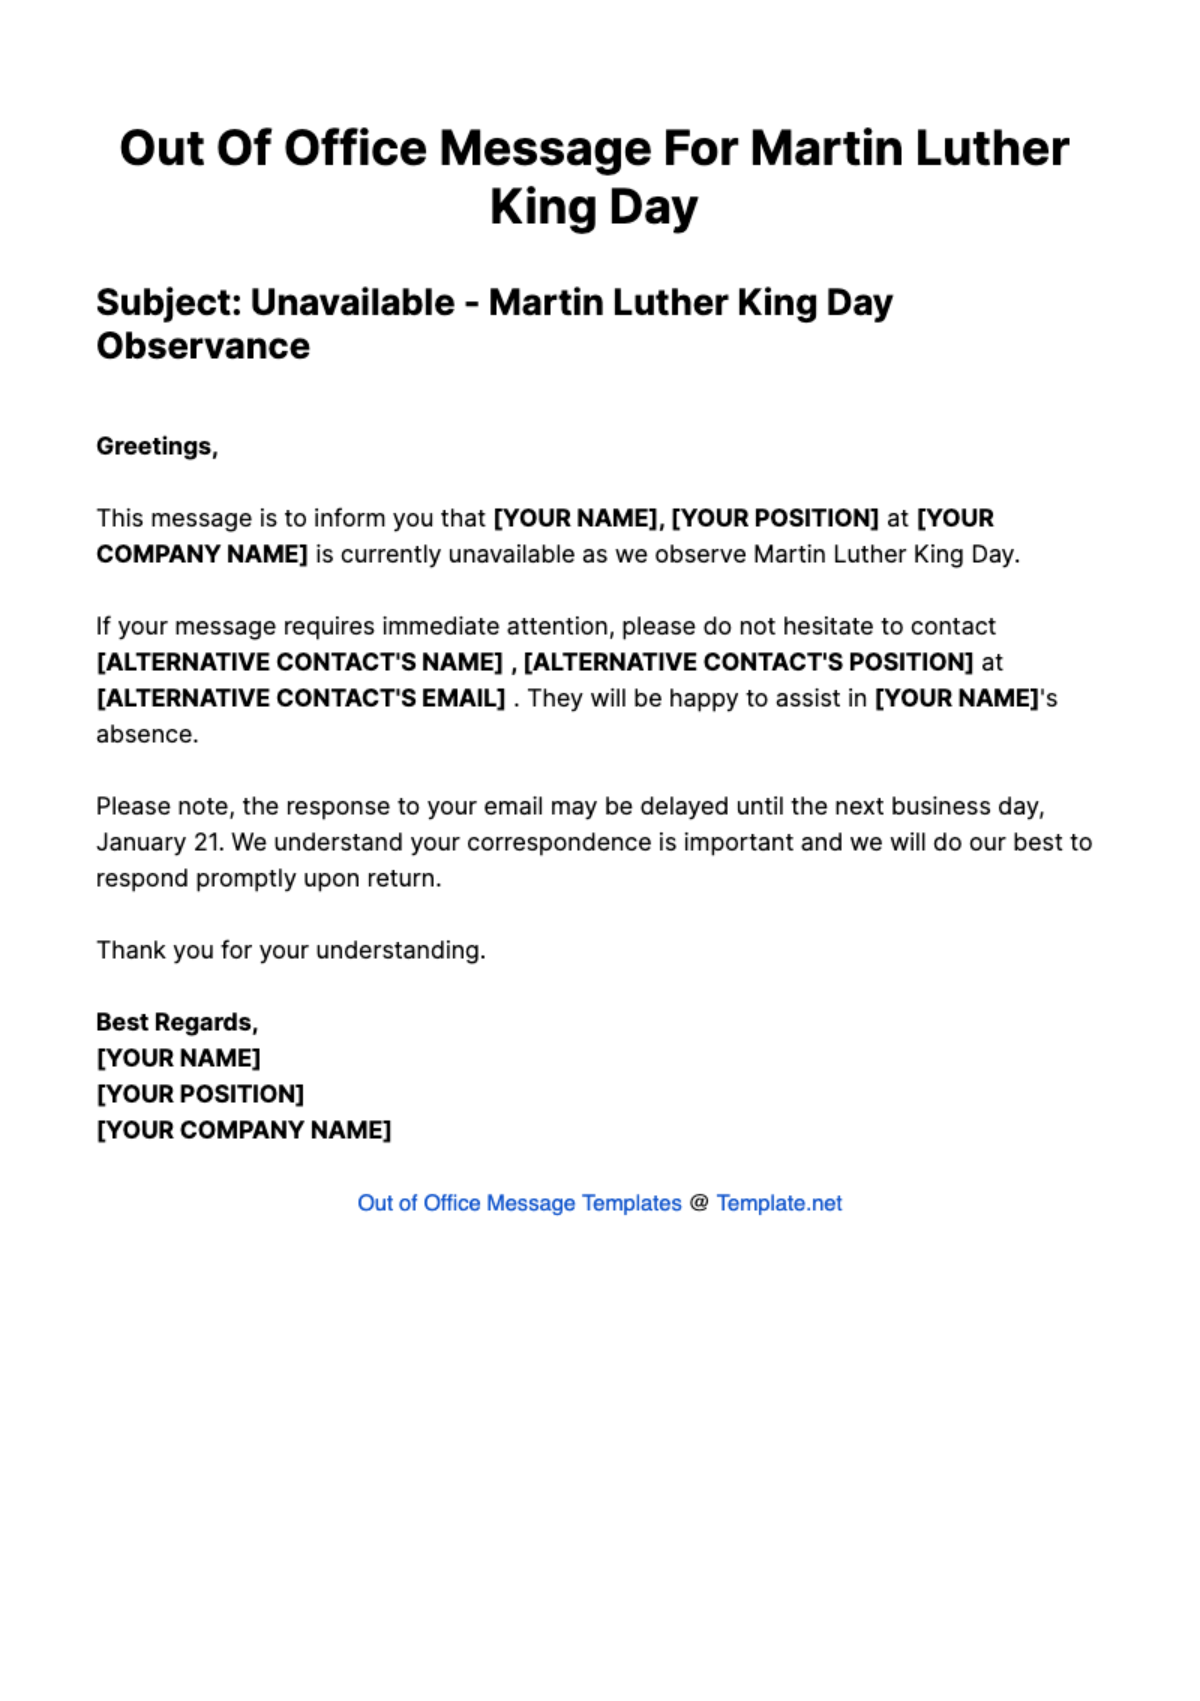 Free Out Of Office Message For Martin Luther King Day Template